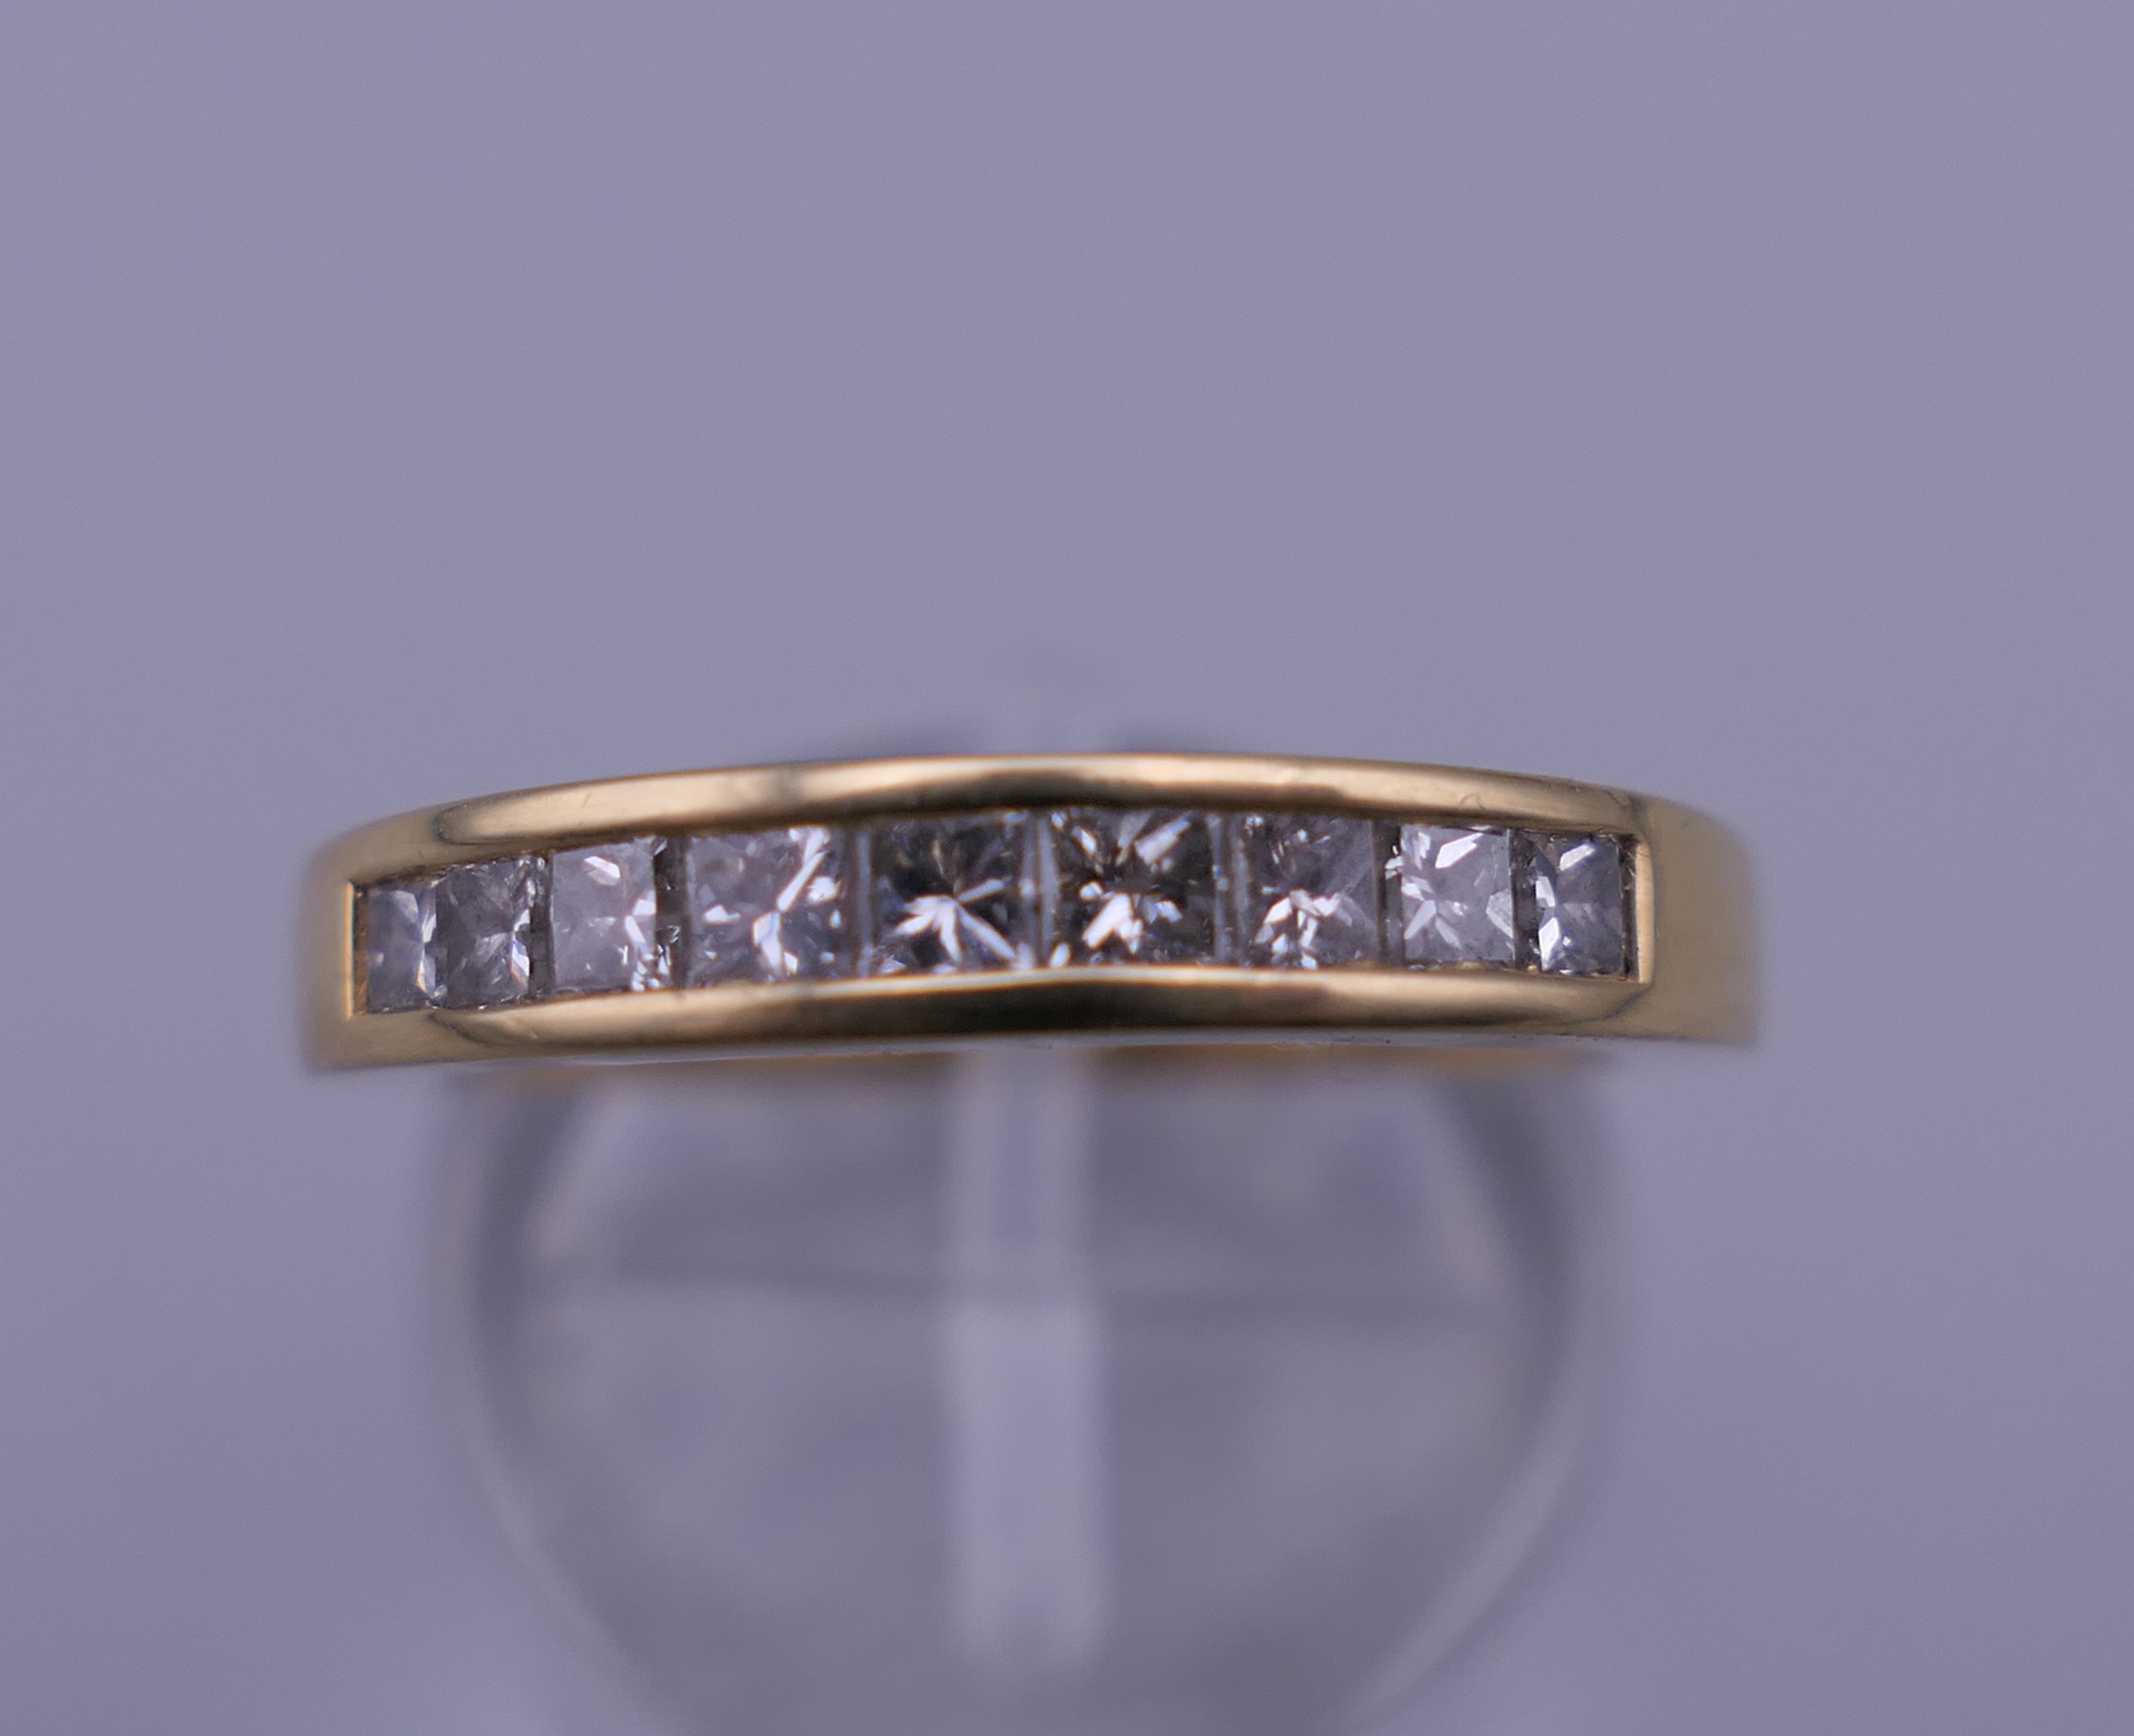 An 18 ct gold diamond ring set with 1/2 carat of diamonds. Ring M/N. 4.4 grammes total weight.